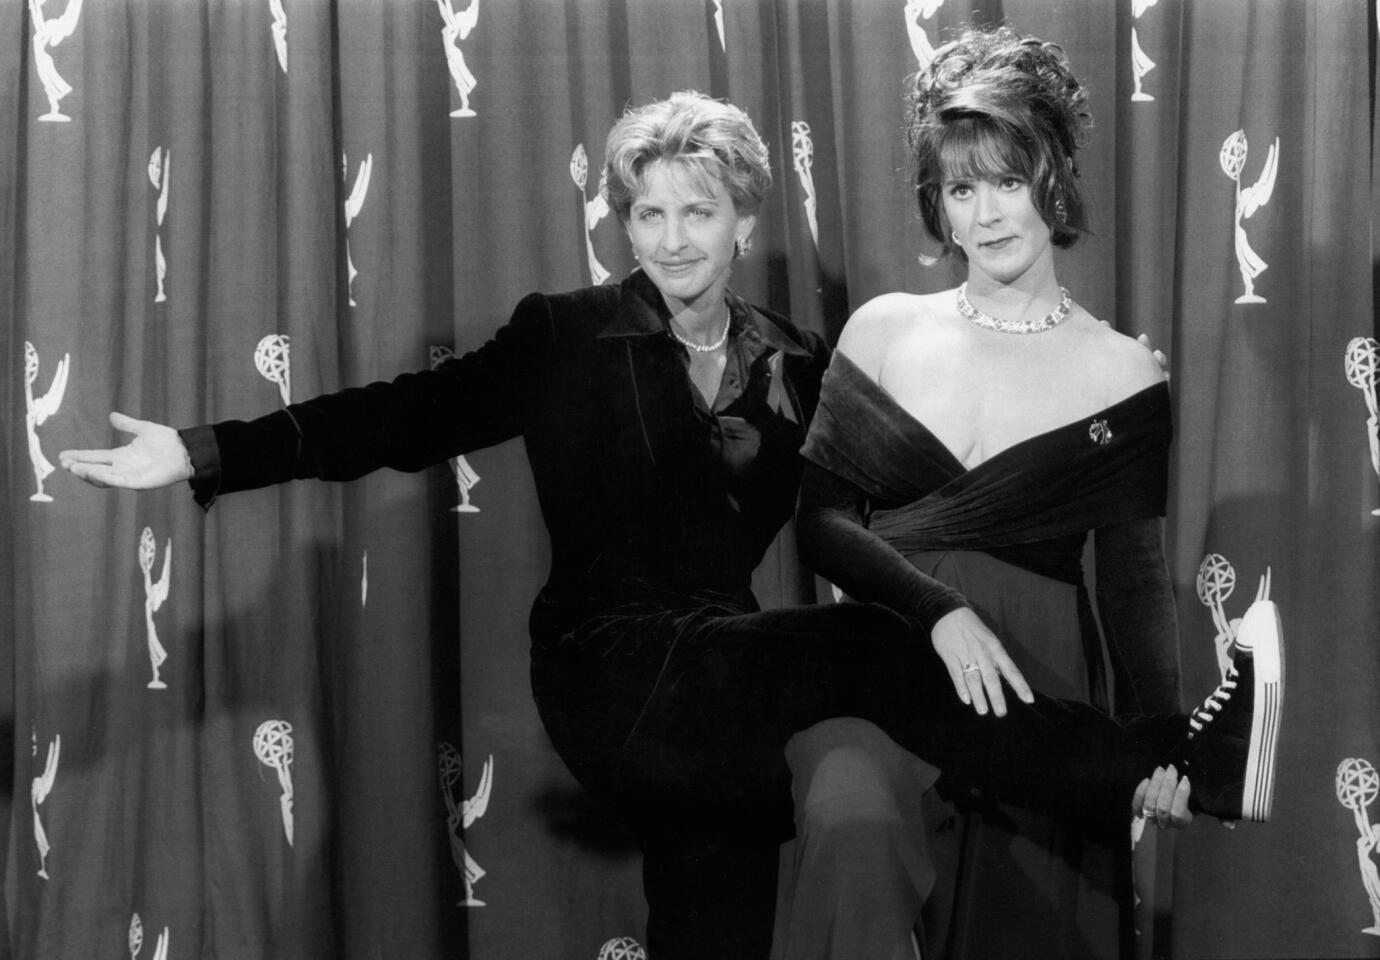 In 2001, DeGeneres was tasked with entertaining a post-9/11 audience. The Louisiana native returned to the 2005 Emmy stage, again bringing much-needed laughter to viewers less than a month after Hurricane Katrina. (DeGeneres and Emmy nominee Patricia Richardson during the 1994 telecast.)